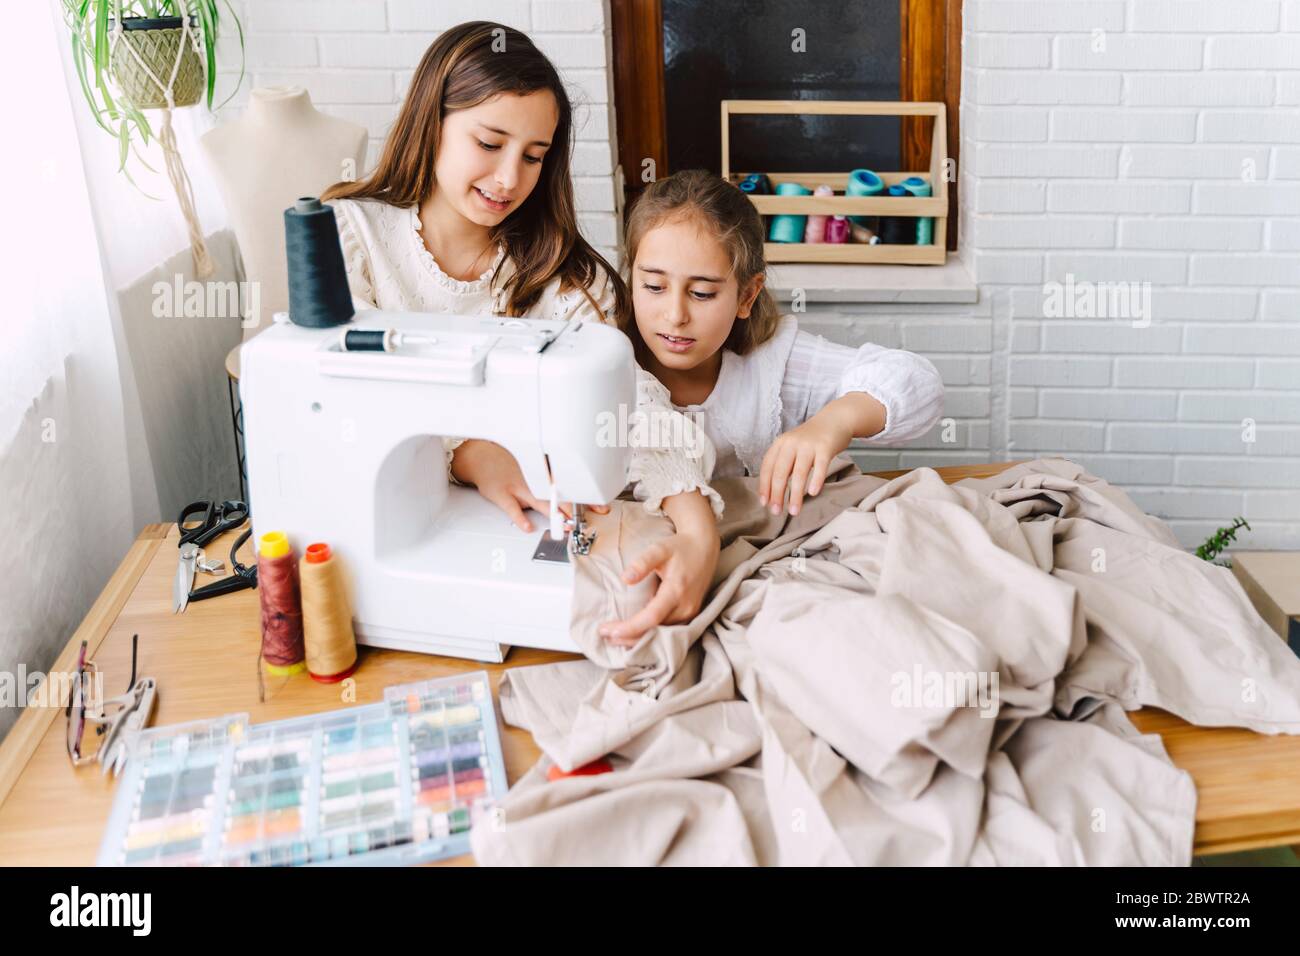 Two girls sewing at home Stock Photo